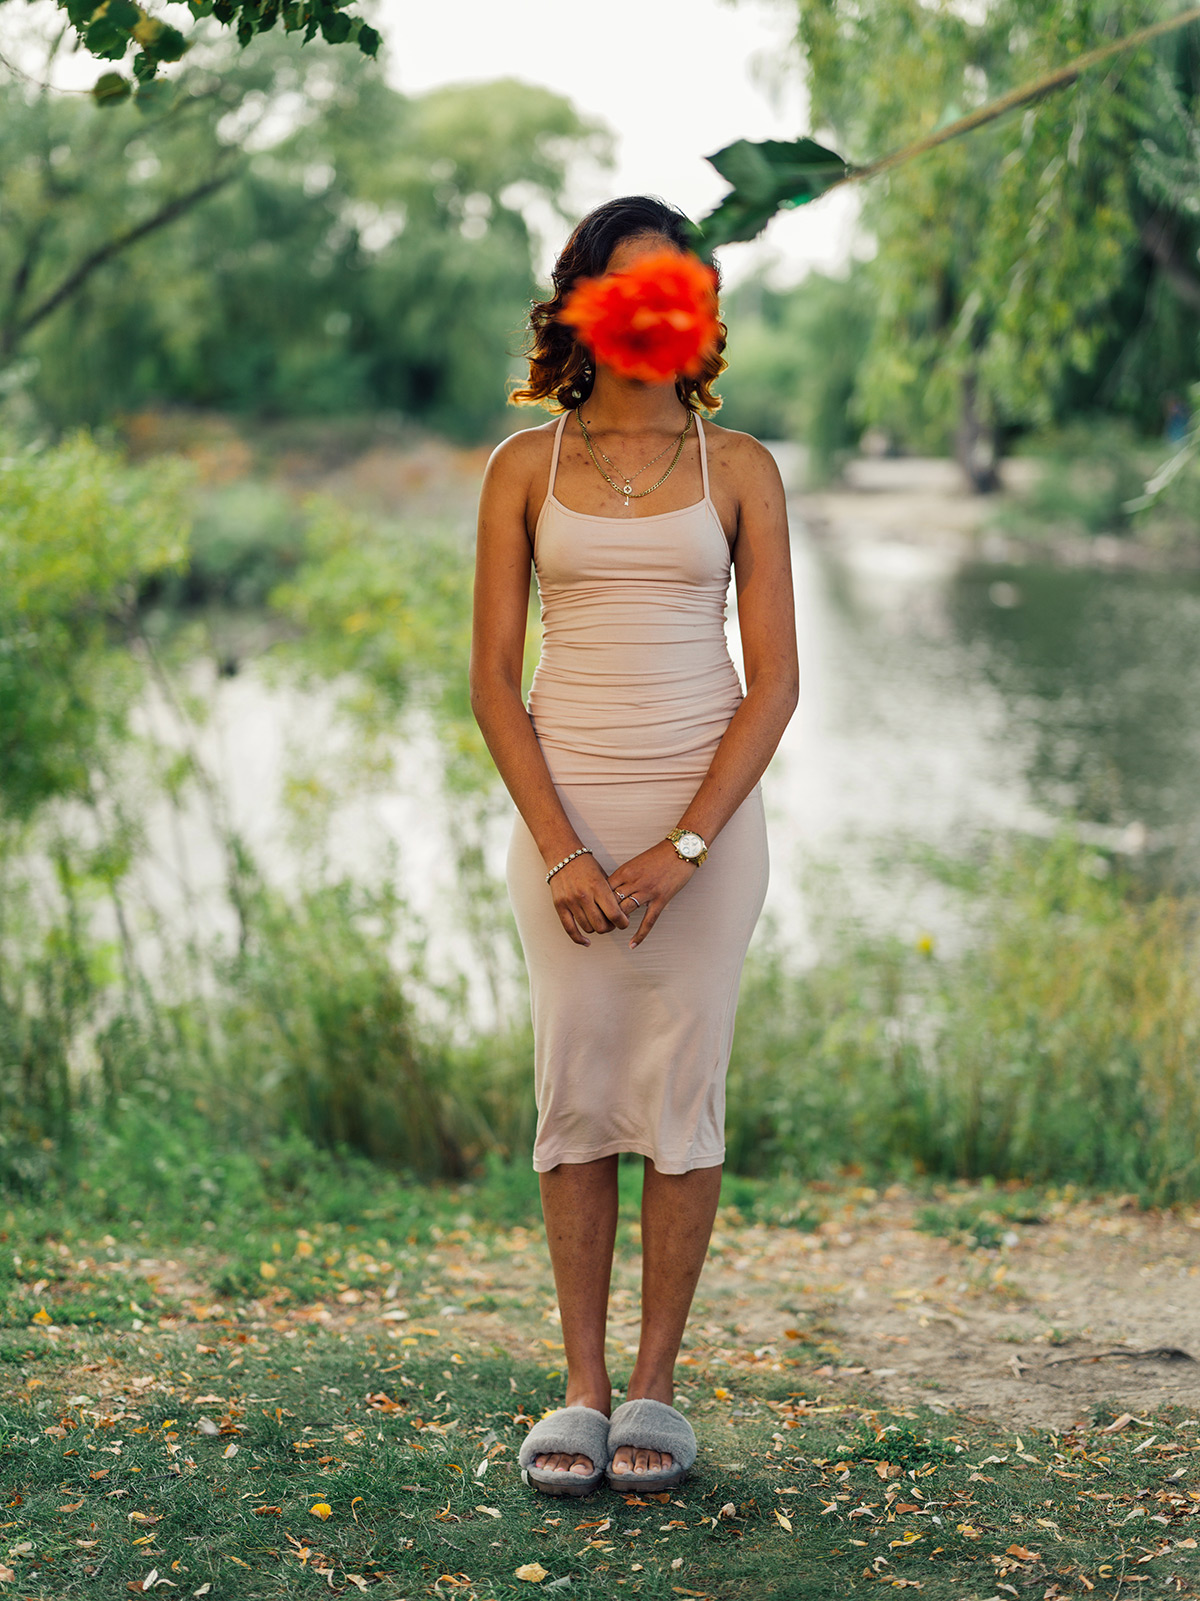 Photo of a teenage girl wearing a spaghetti-strap dress and fuzzy sandals. She is standing outside near a lake with green trees and bushes visible. A single out of focus red dhalia hangs down from the edge of her frame, blocking her face from view.